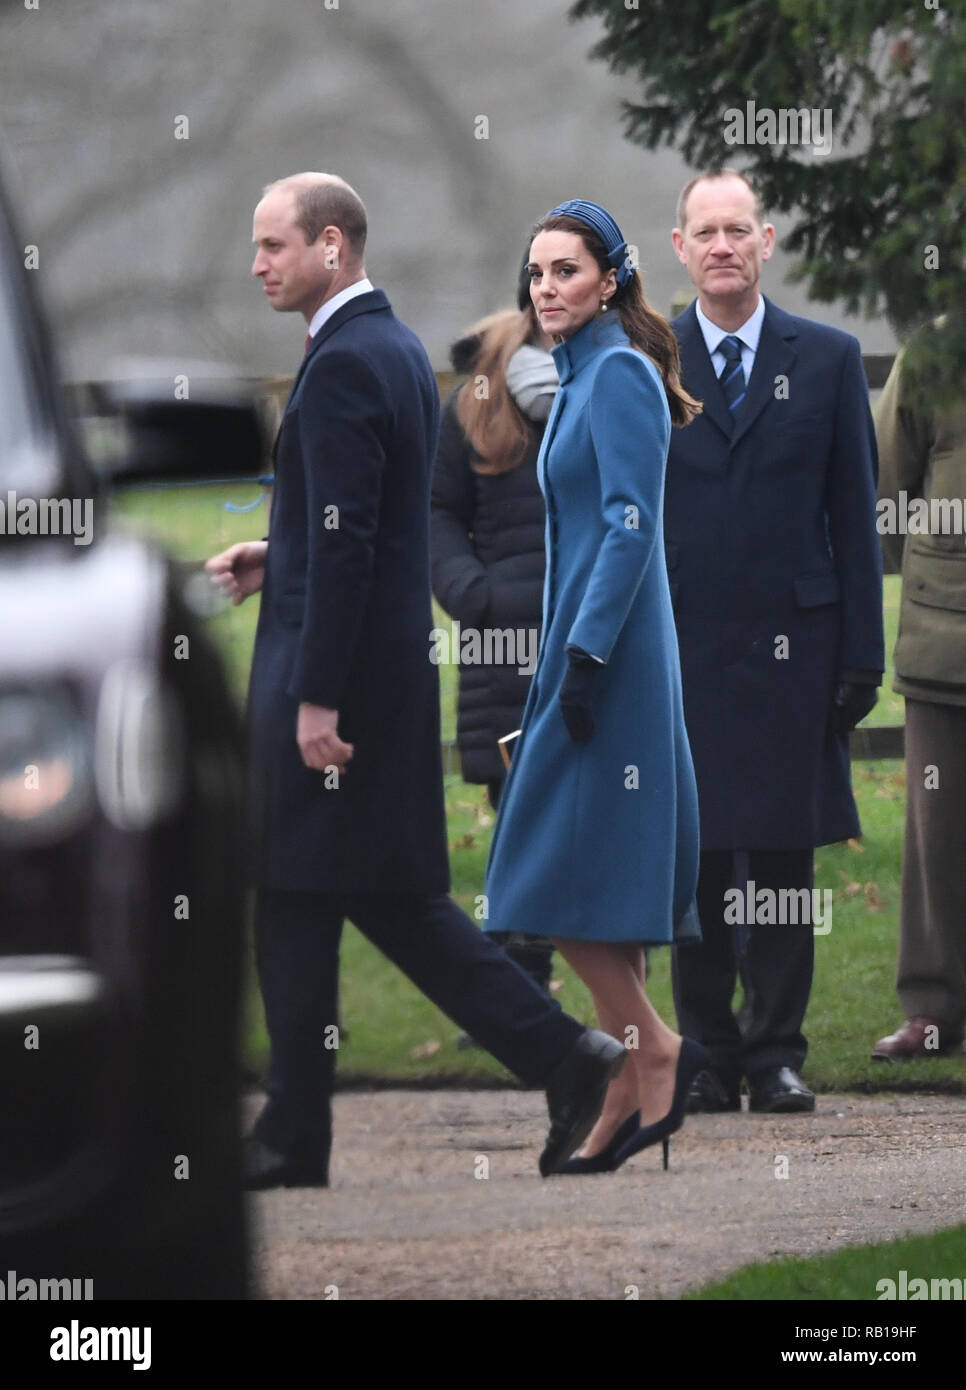 the-duke-and-duchess-of-cambridge-leaving-after-attending-a-church-service-at-st-mary-magdalene-church-in-sandringham-norfolk-RB19HF.jpg